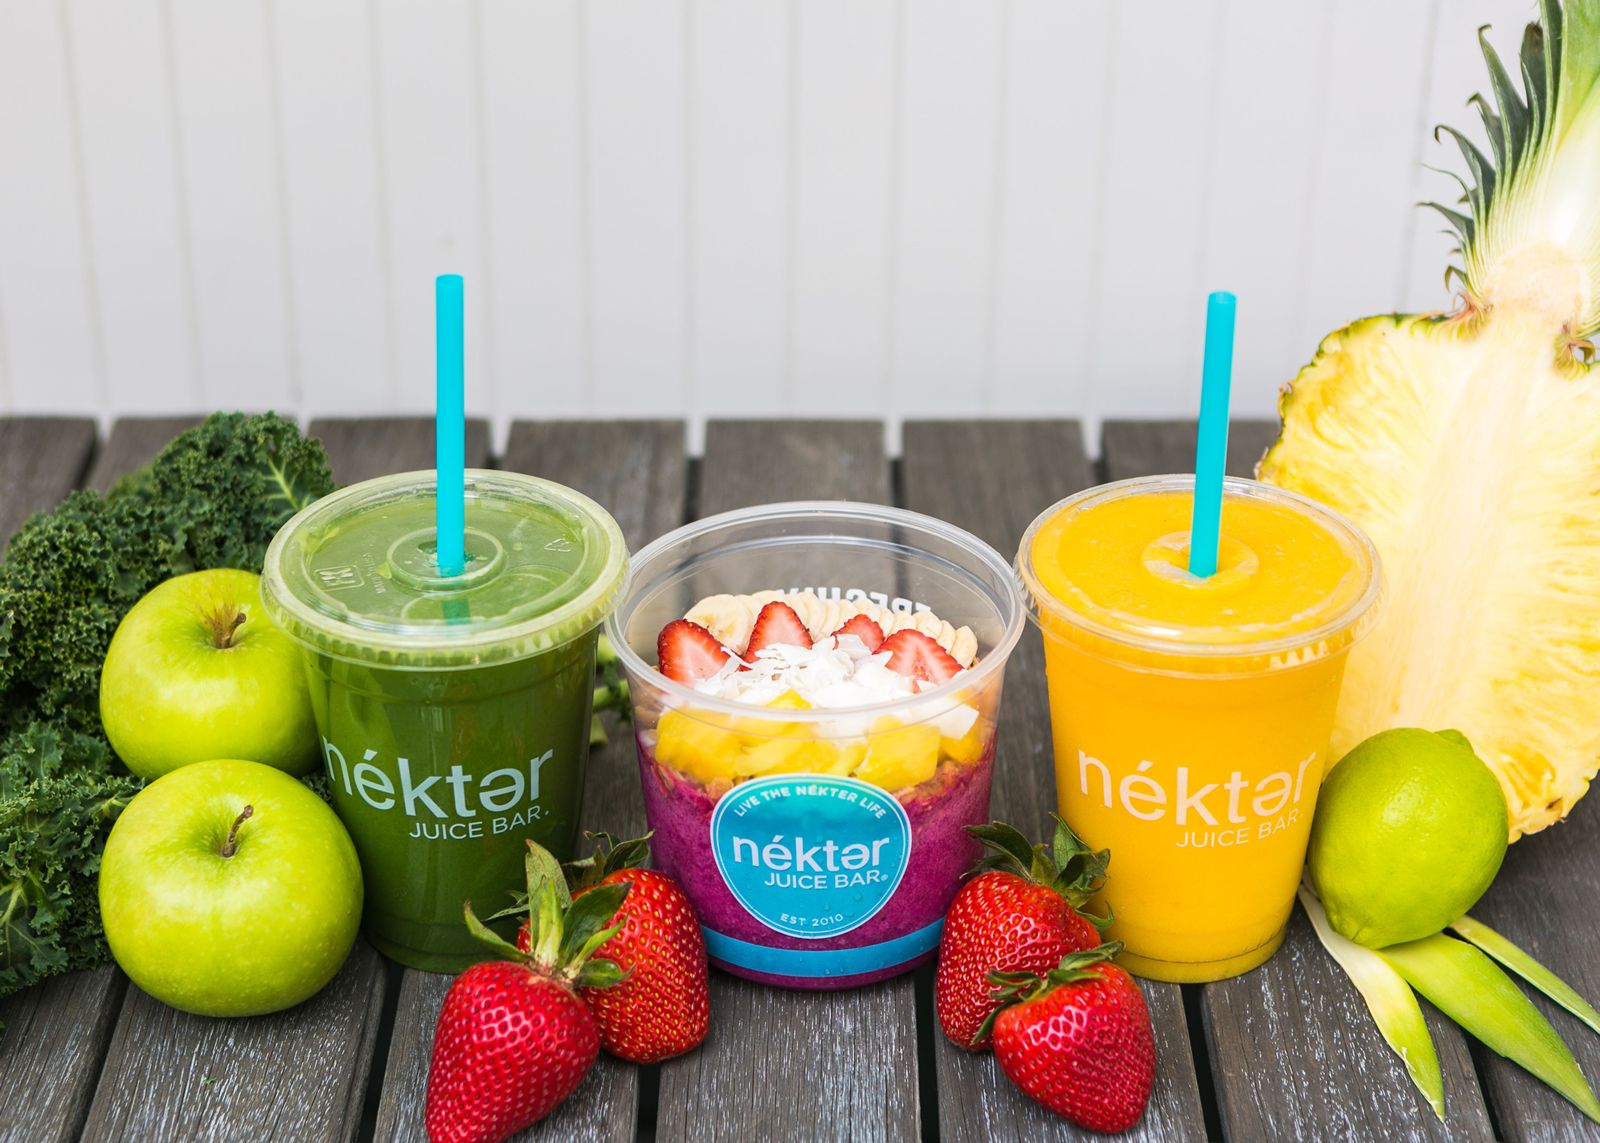 Nékter Juice Bar to Open First Whole Foods Market Location on May 22, 2019, in Porter Ranch, California